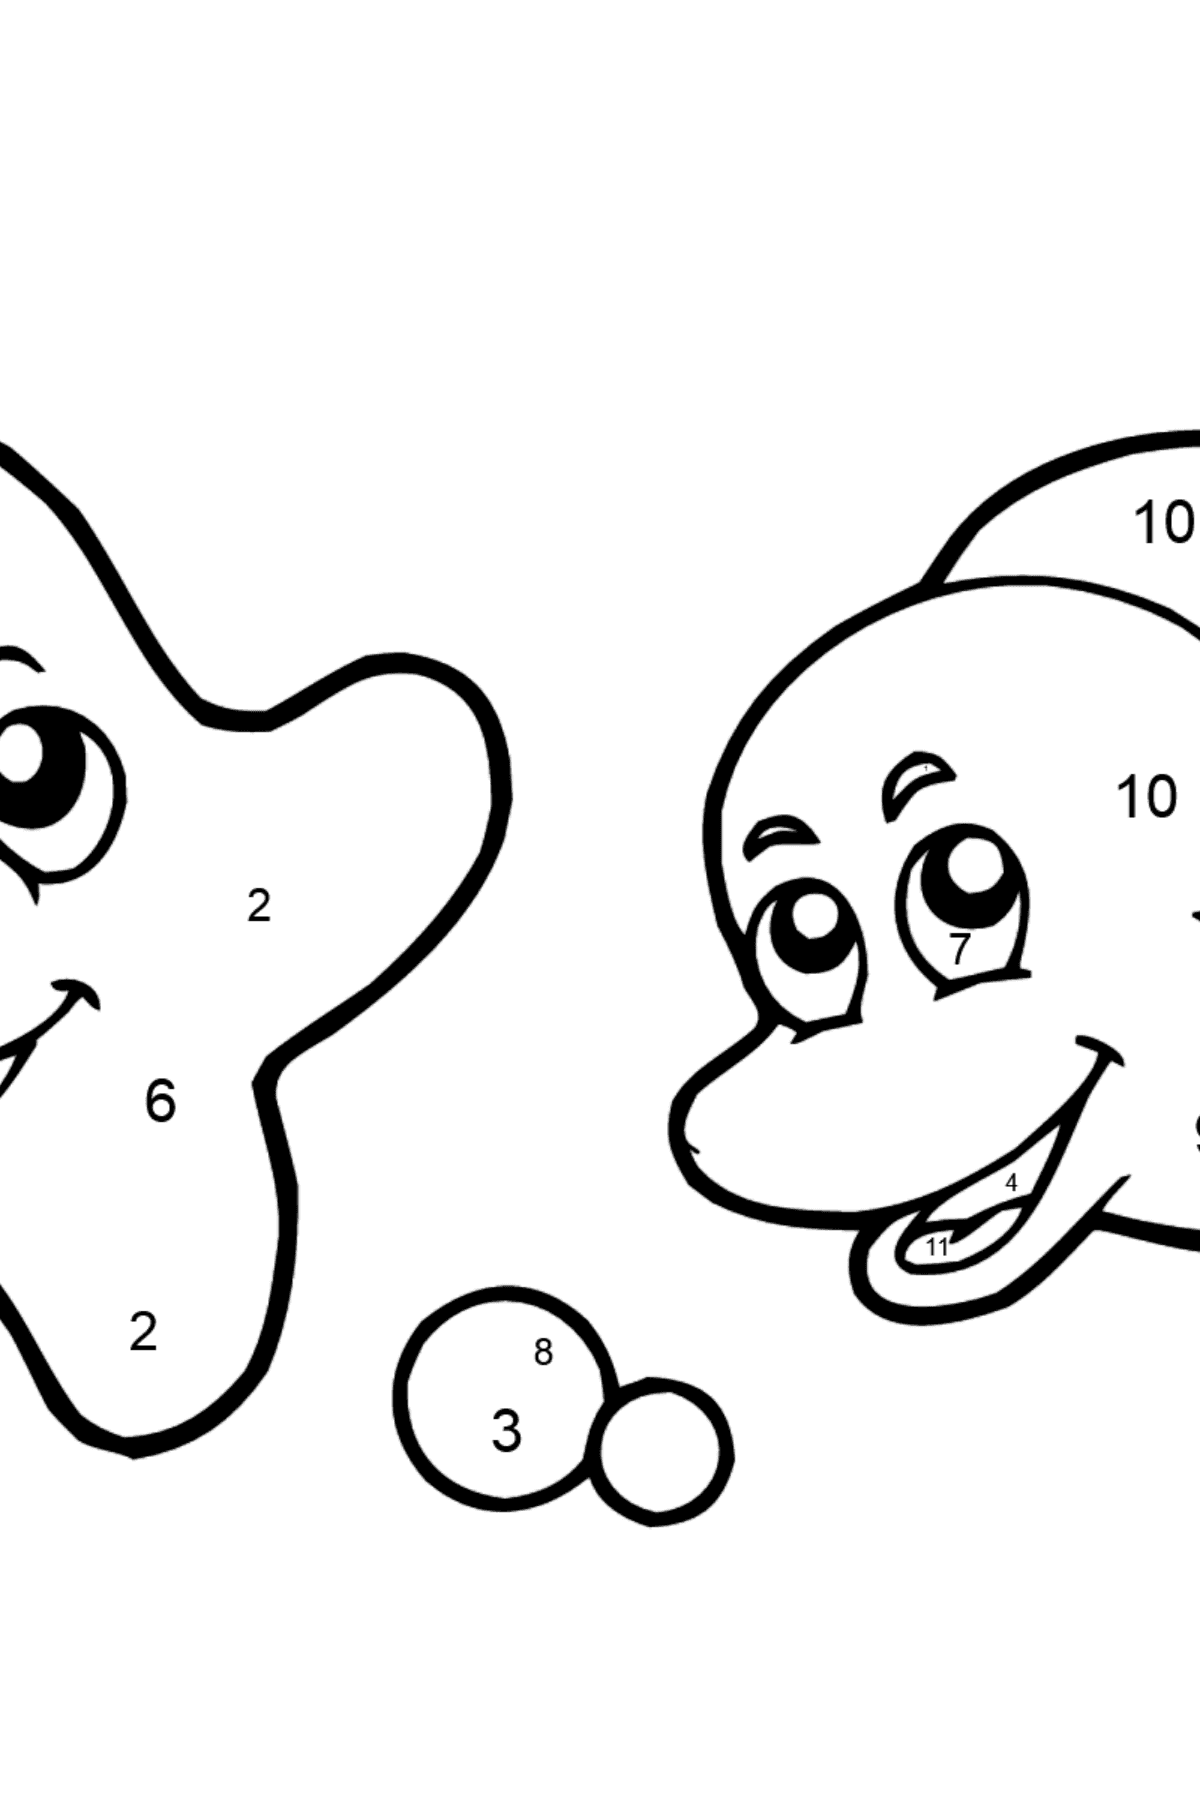 Dolphin and Starfish Coloring page - Coloring by Numbers for Kids